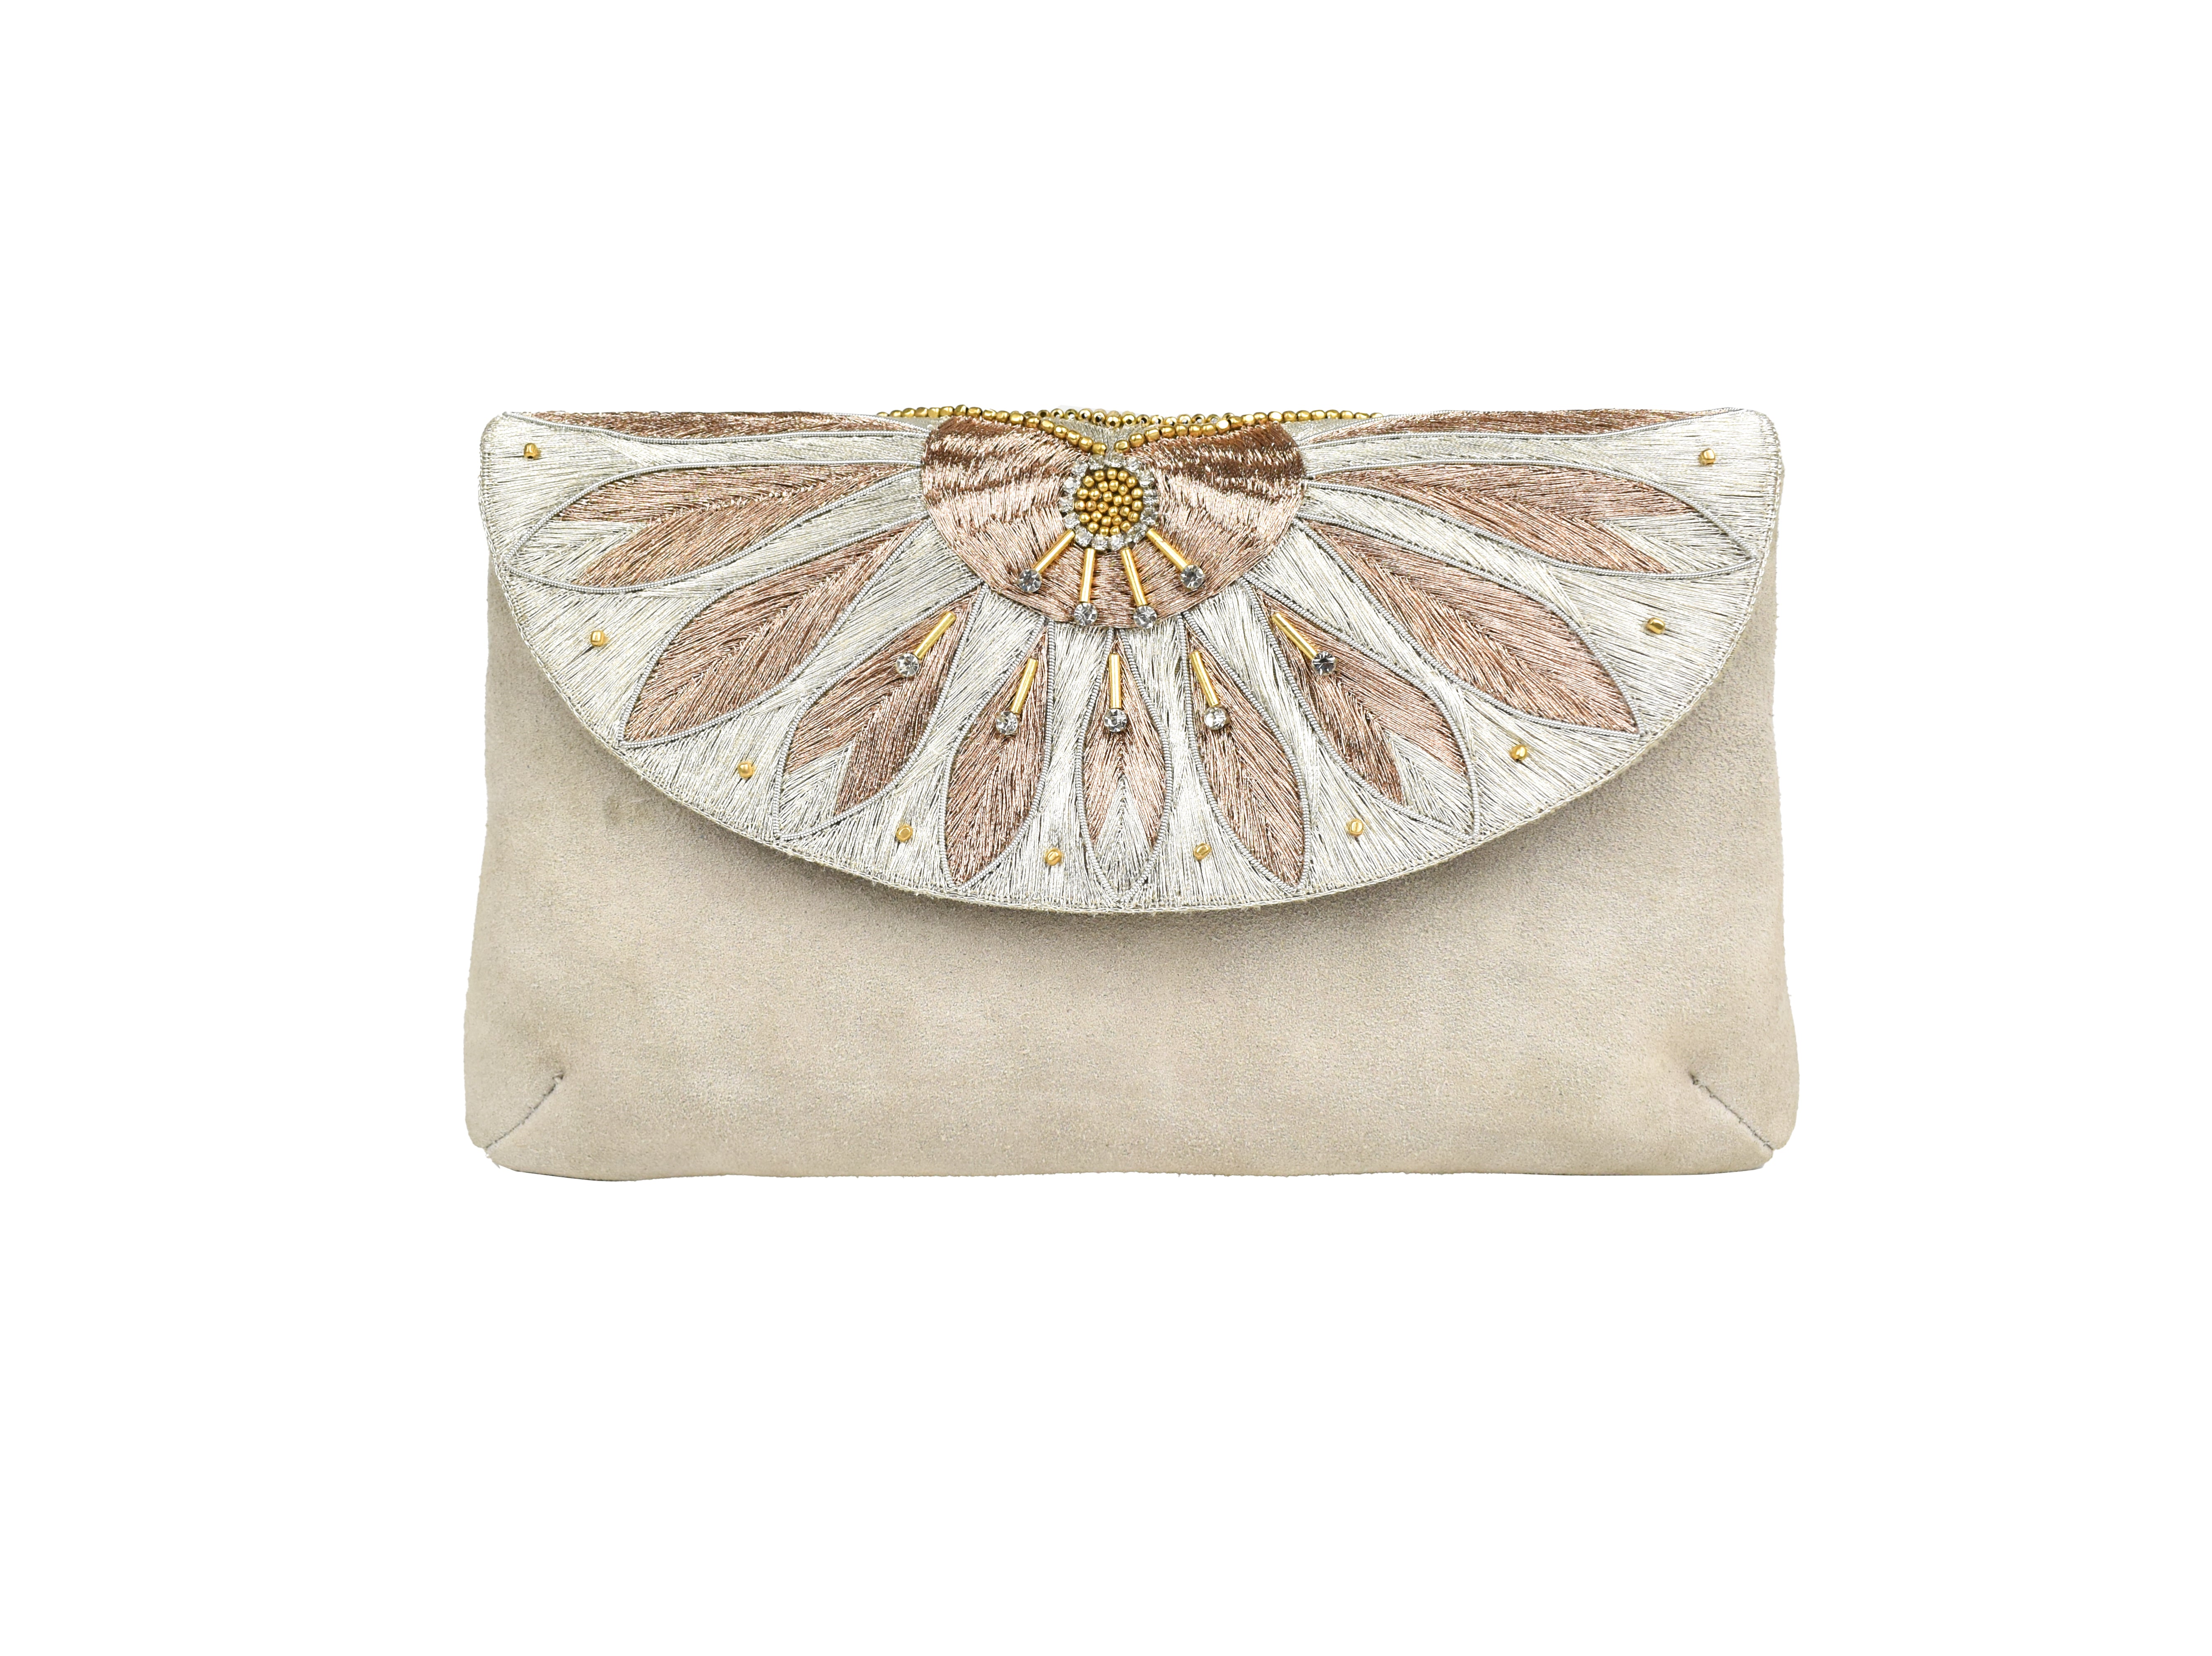 apolonia bag b nahua in pearl suede clutch or cross body bag with hand embroidered details